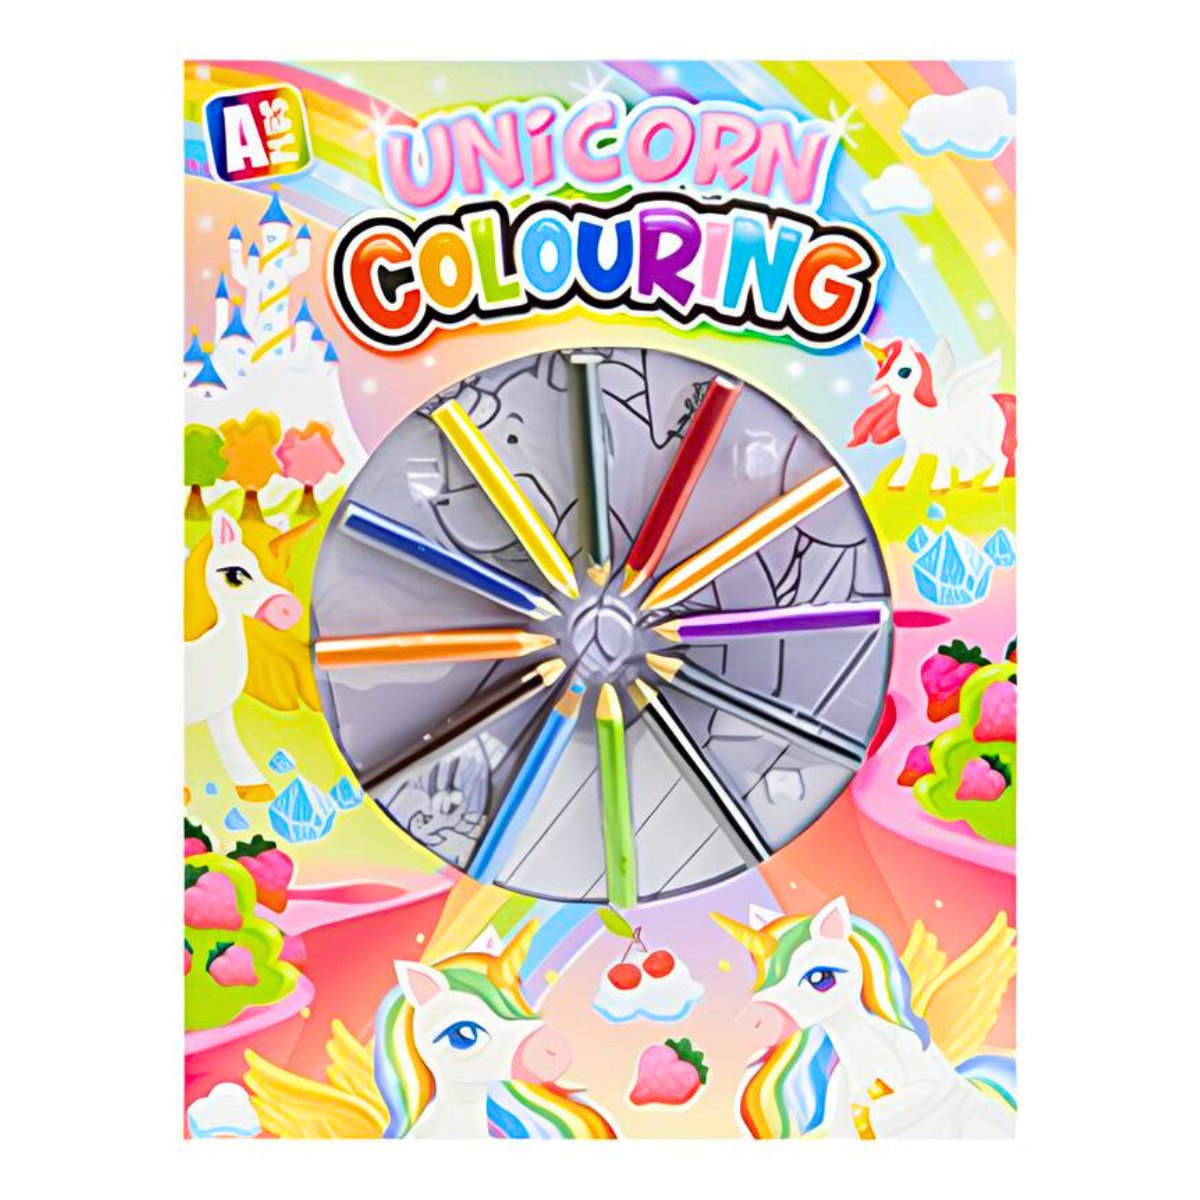 Unicorn Colouring Book With 12 Wax Crayons - Kids Party Craft